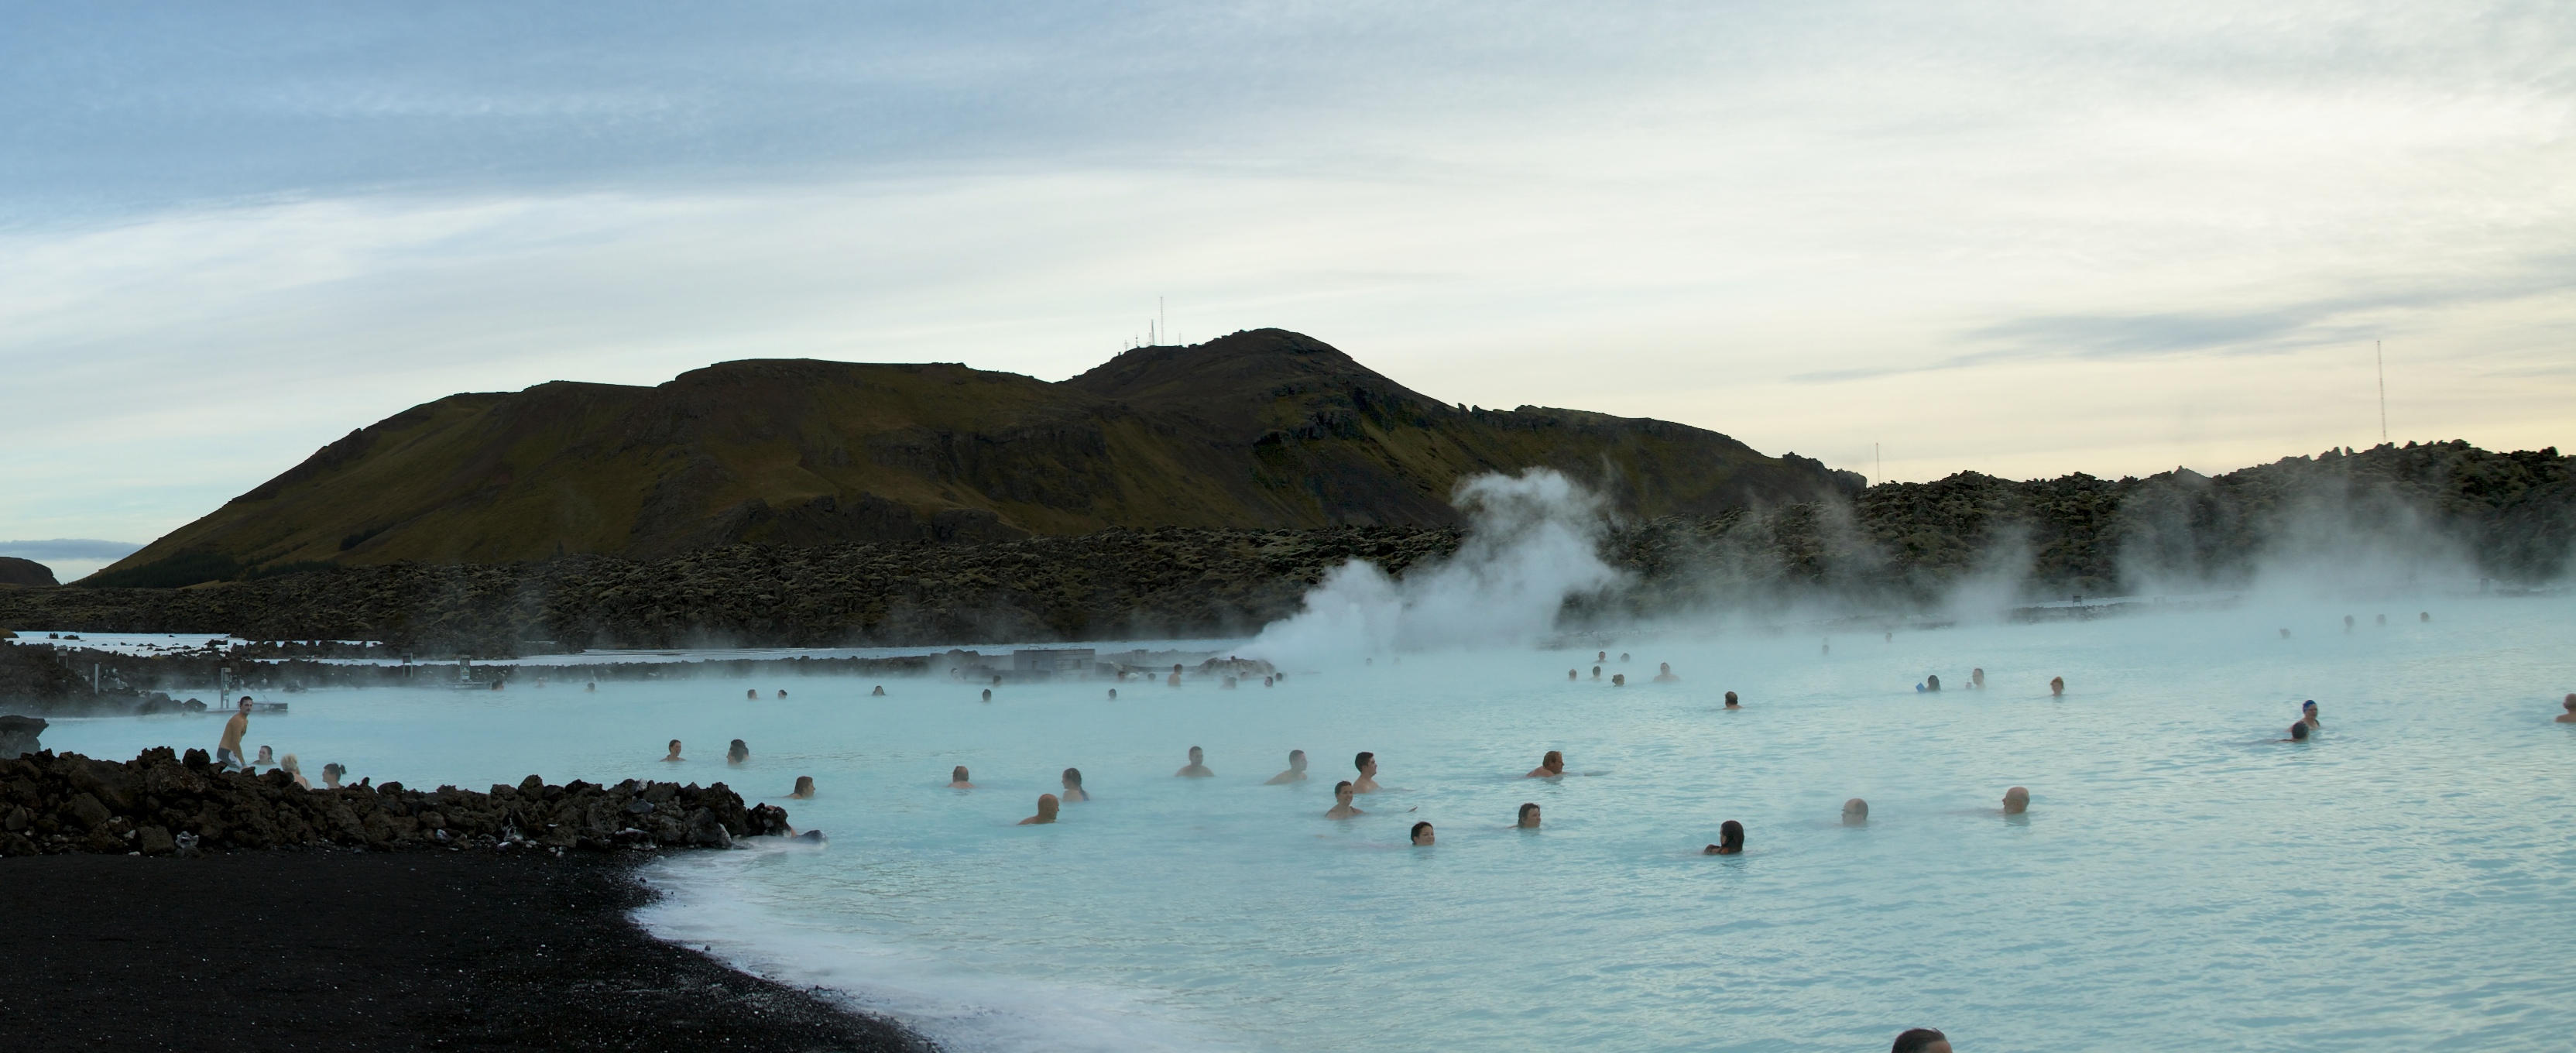 The lovely thermal waters of Iceland's understandably famous Blue Lagoon. Paradise.